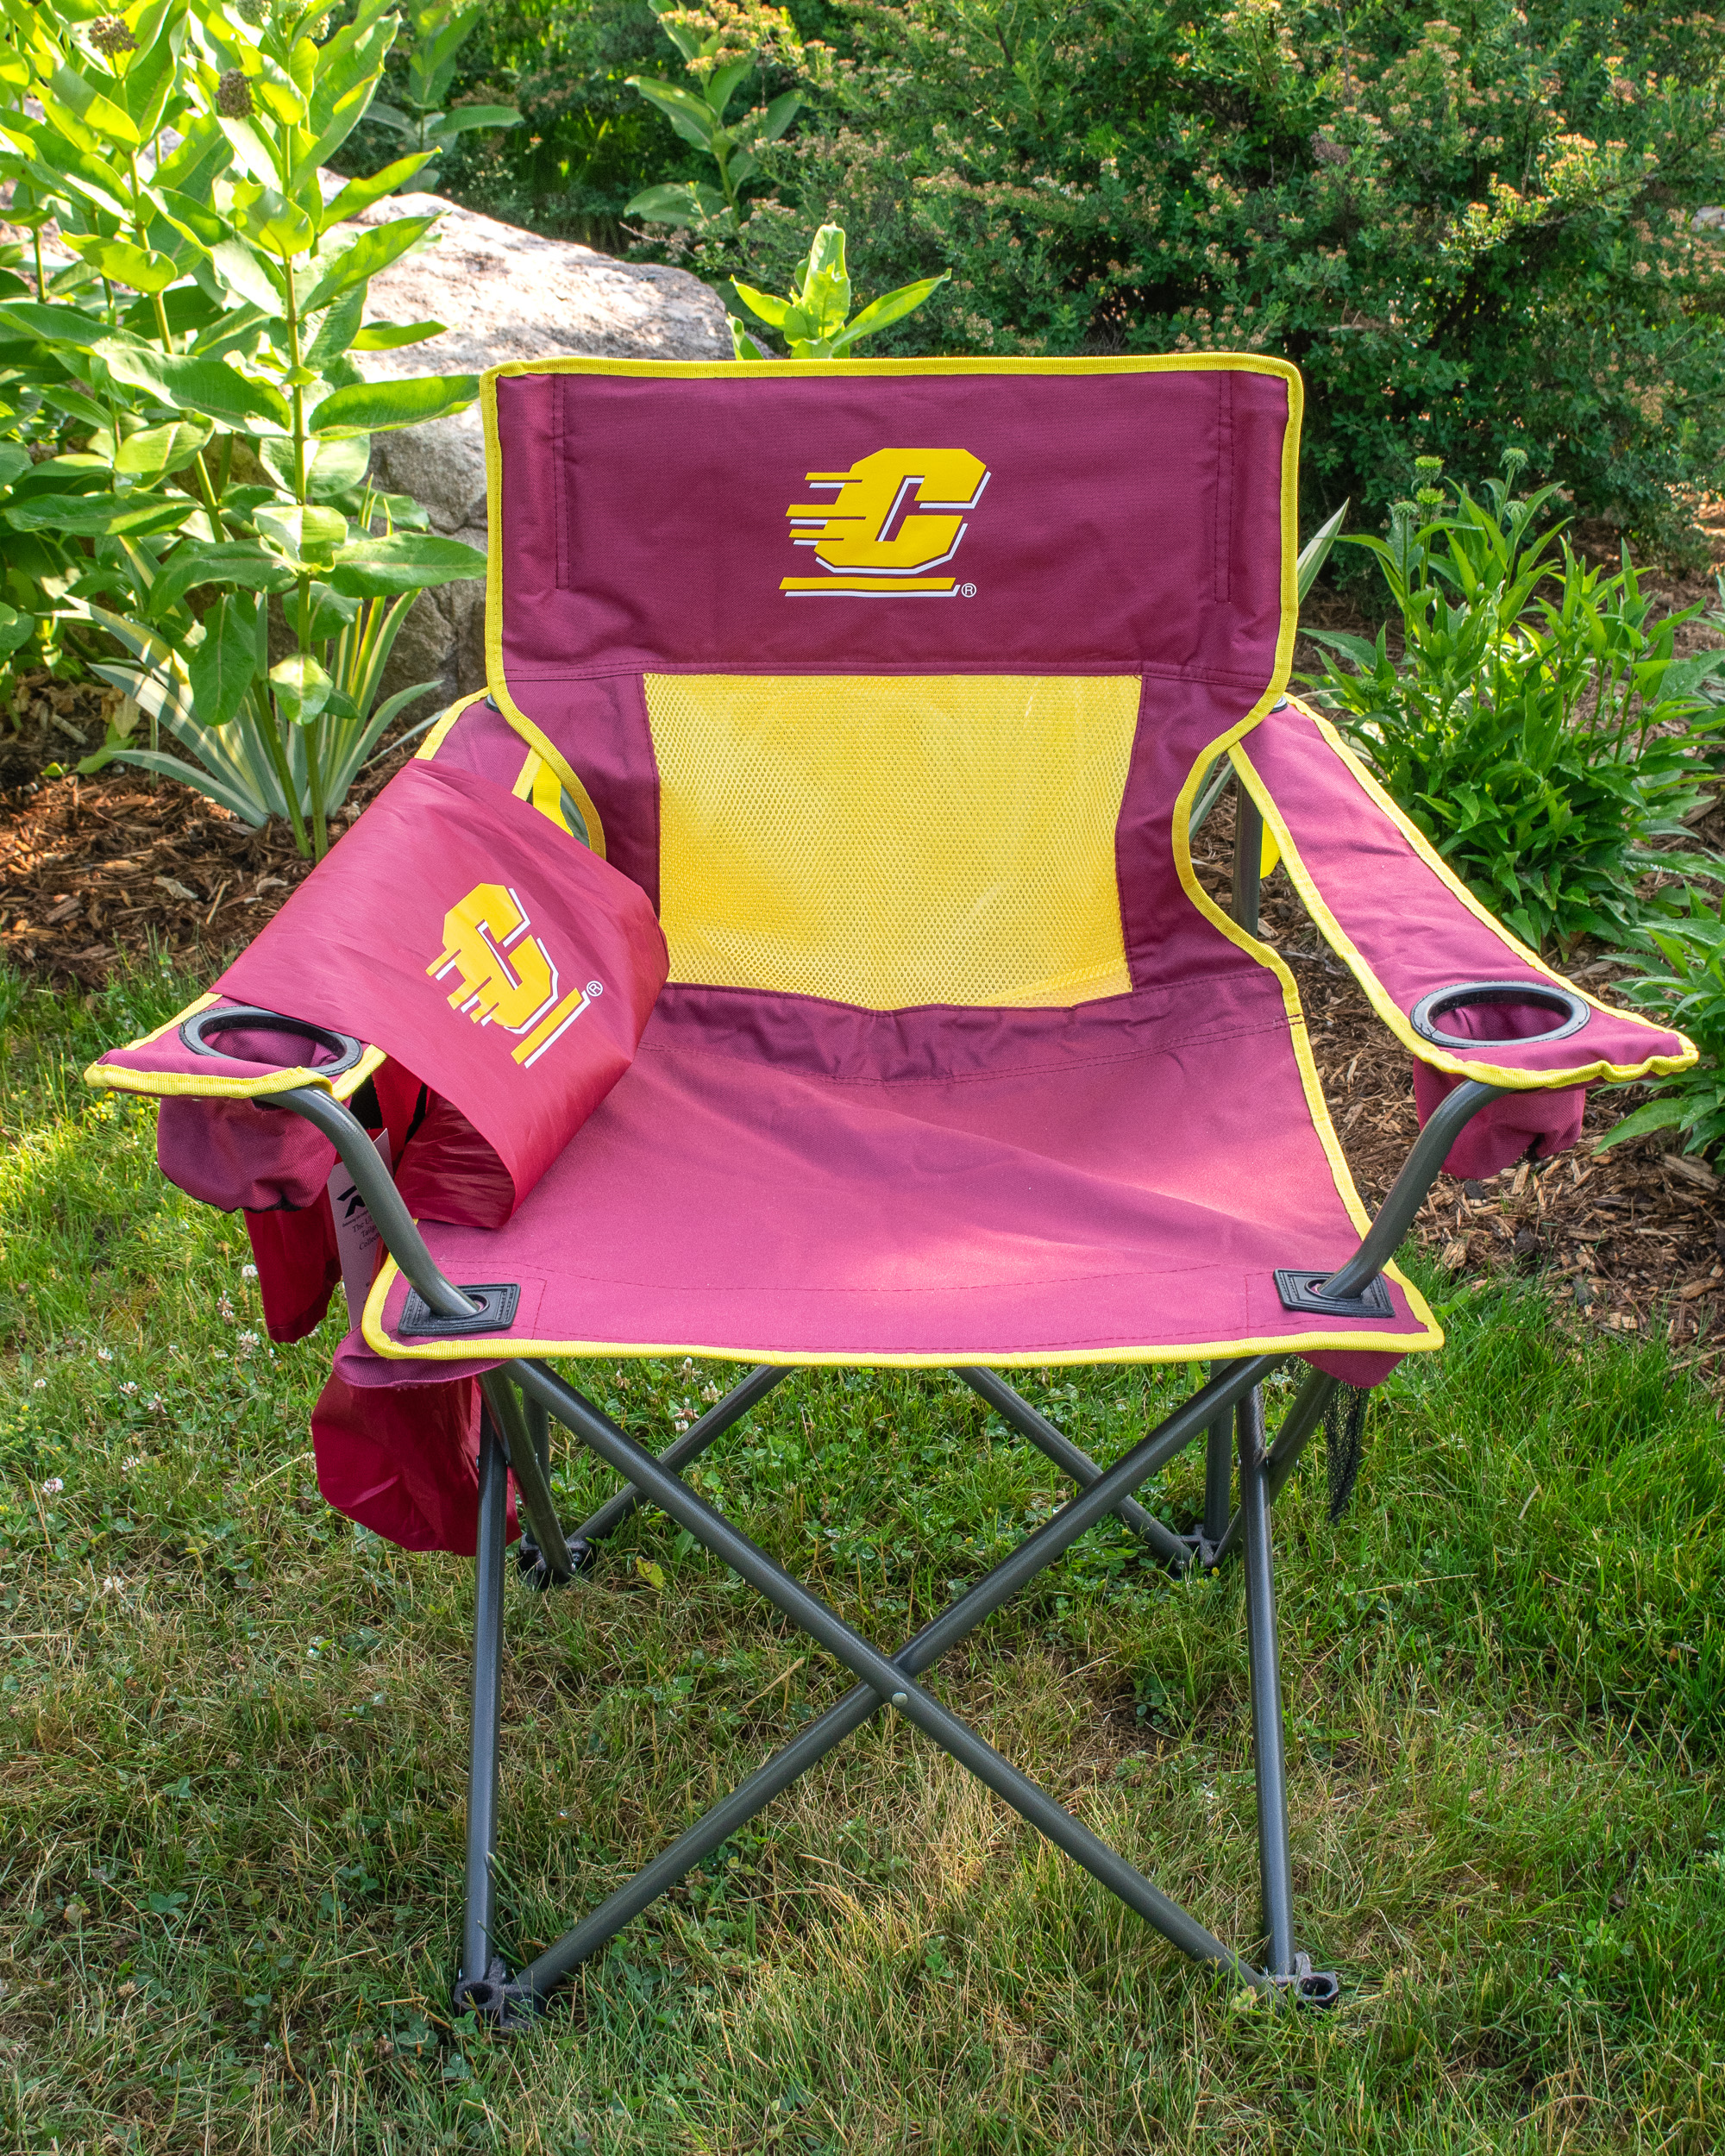 CMU Chippewas Action C Maroon Deluxe Tailgate Chair